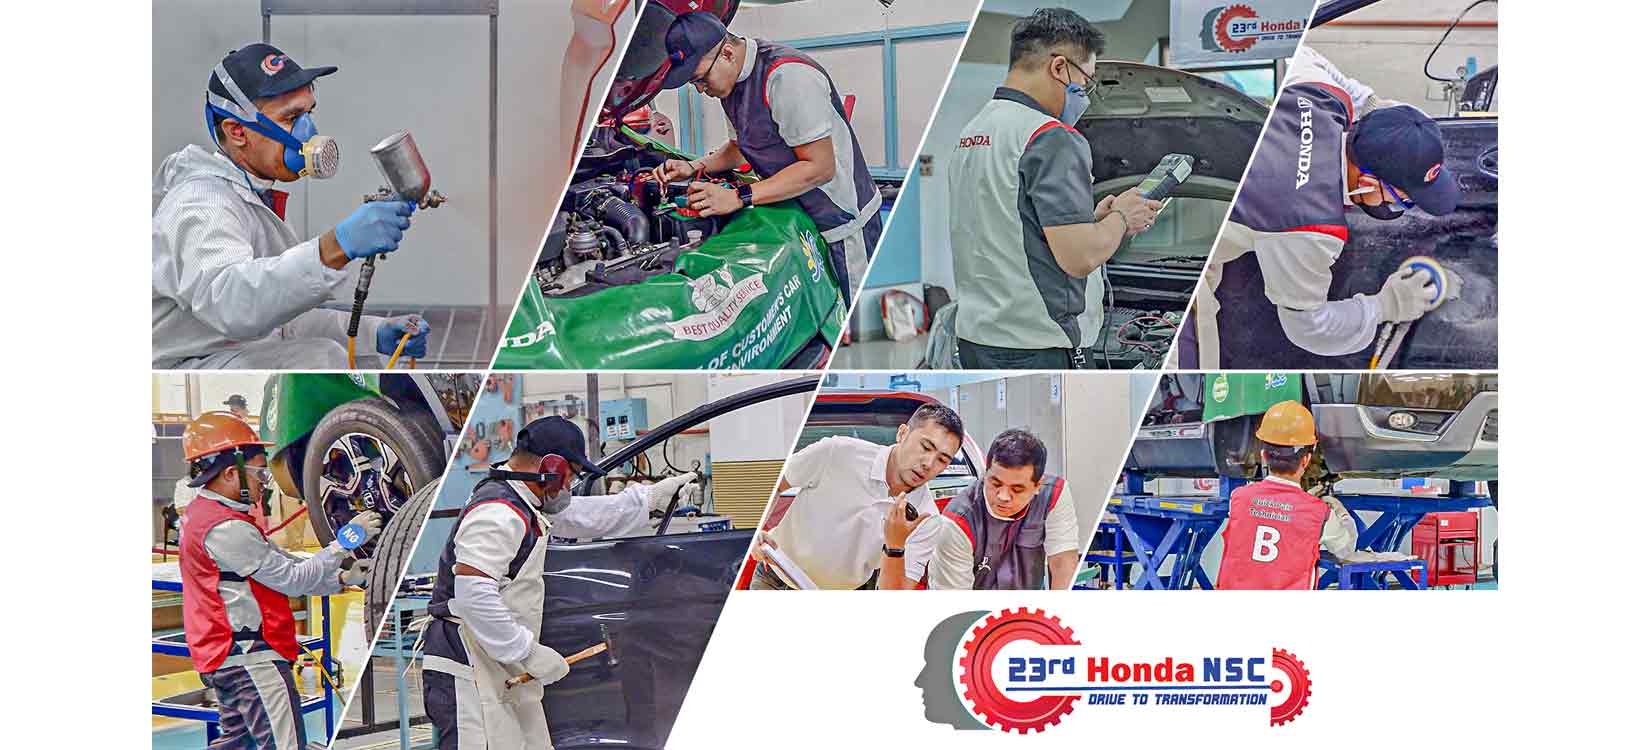 Honda continues to raise the bar high for after-sales service through its 23rd National Skills Contest